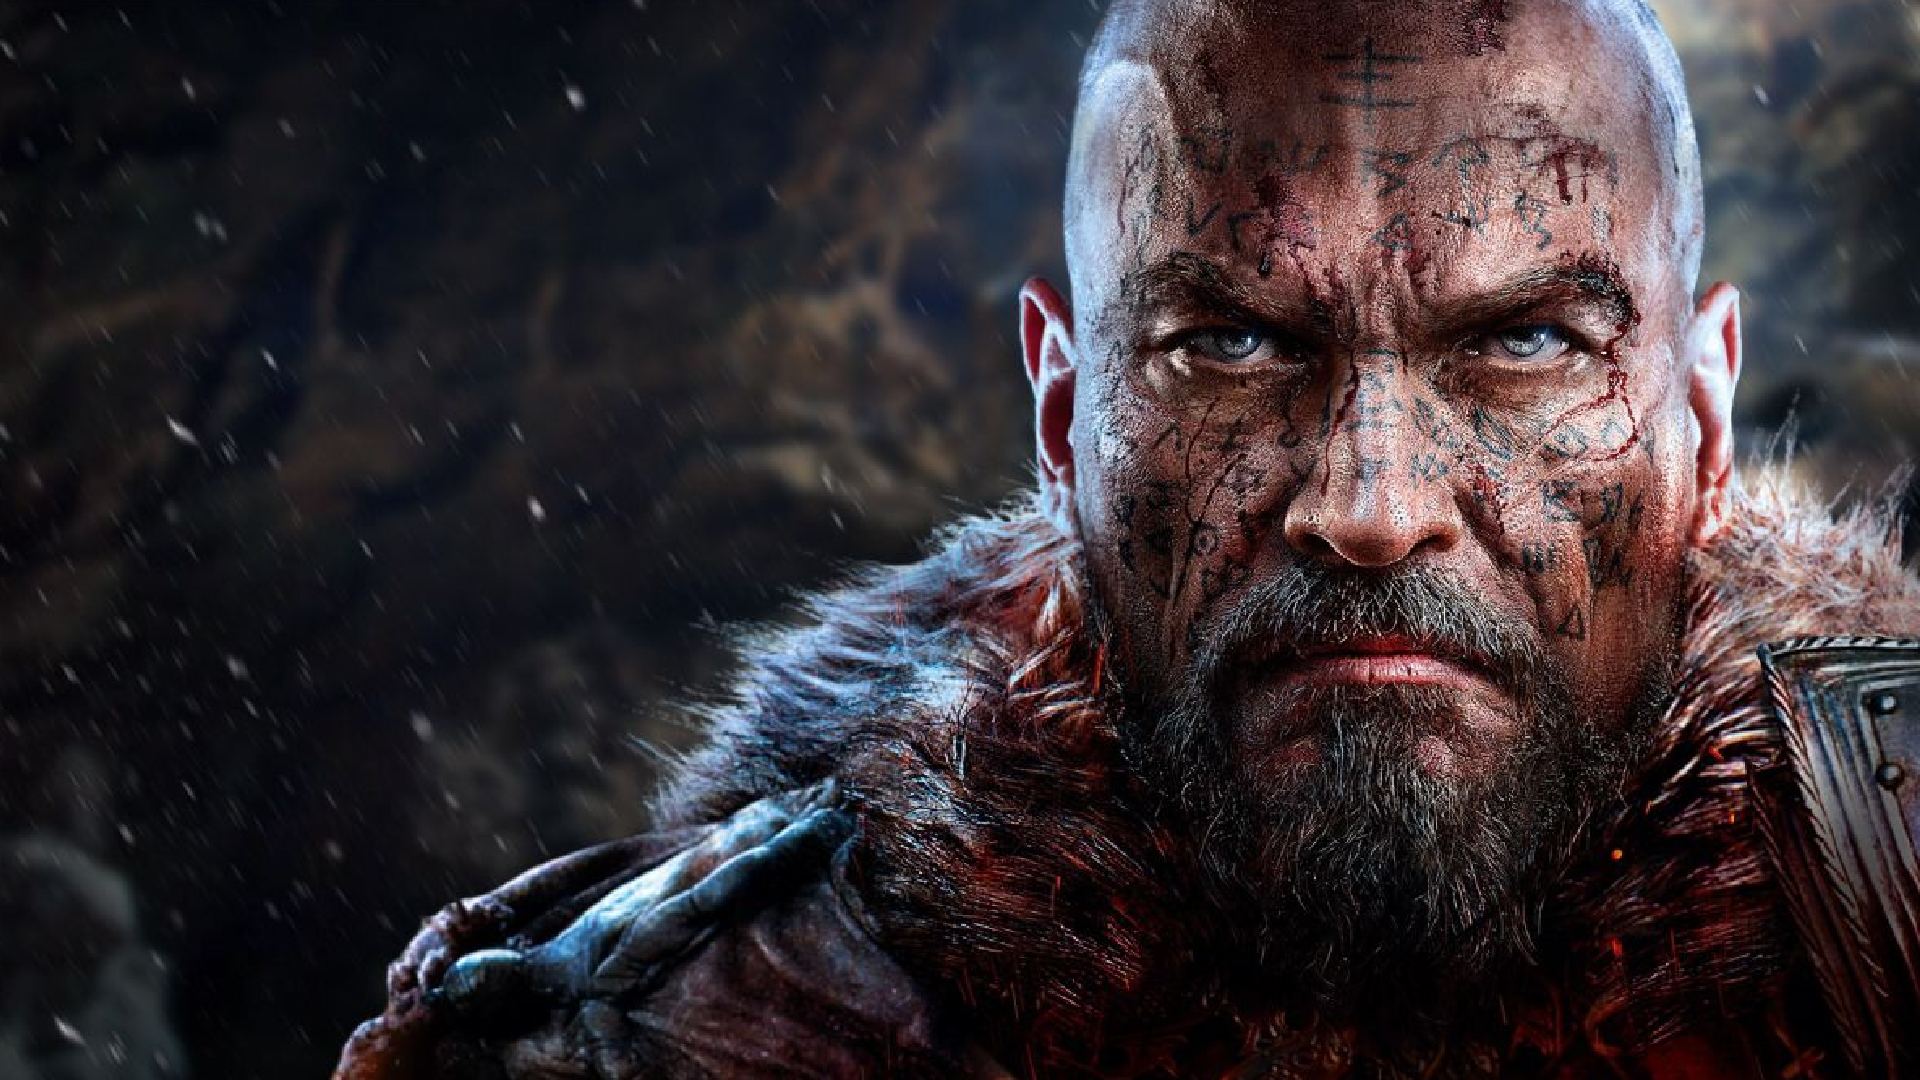 Lords Of The Fallen 2: A character can be seen in a piece of art for the game.